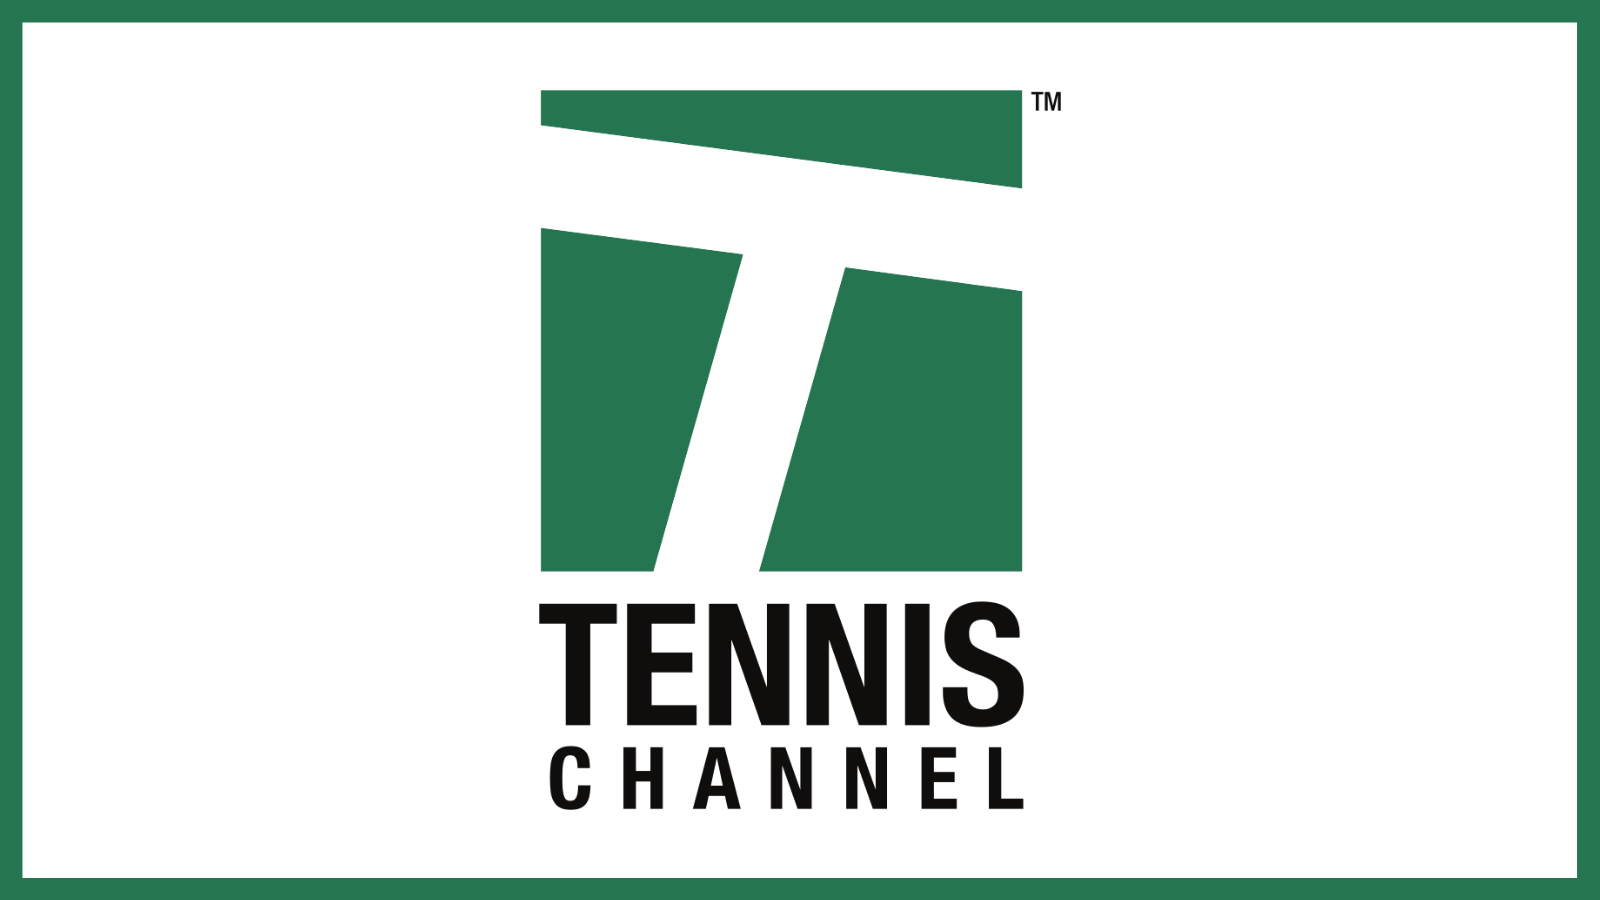 How to Watch Tennis Channel Online